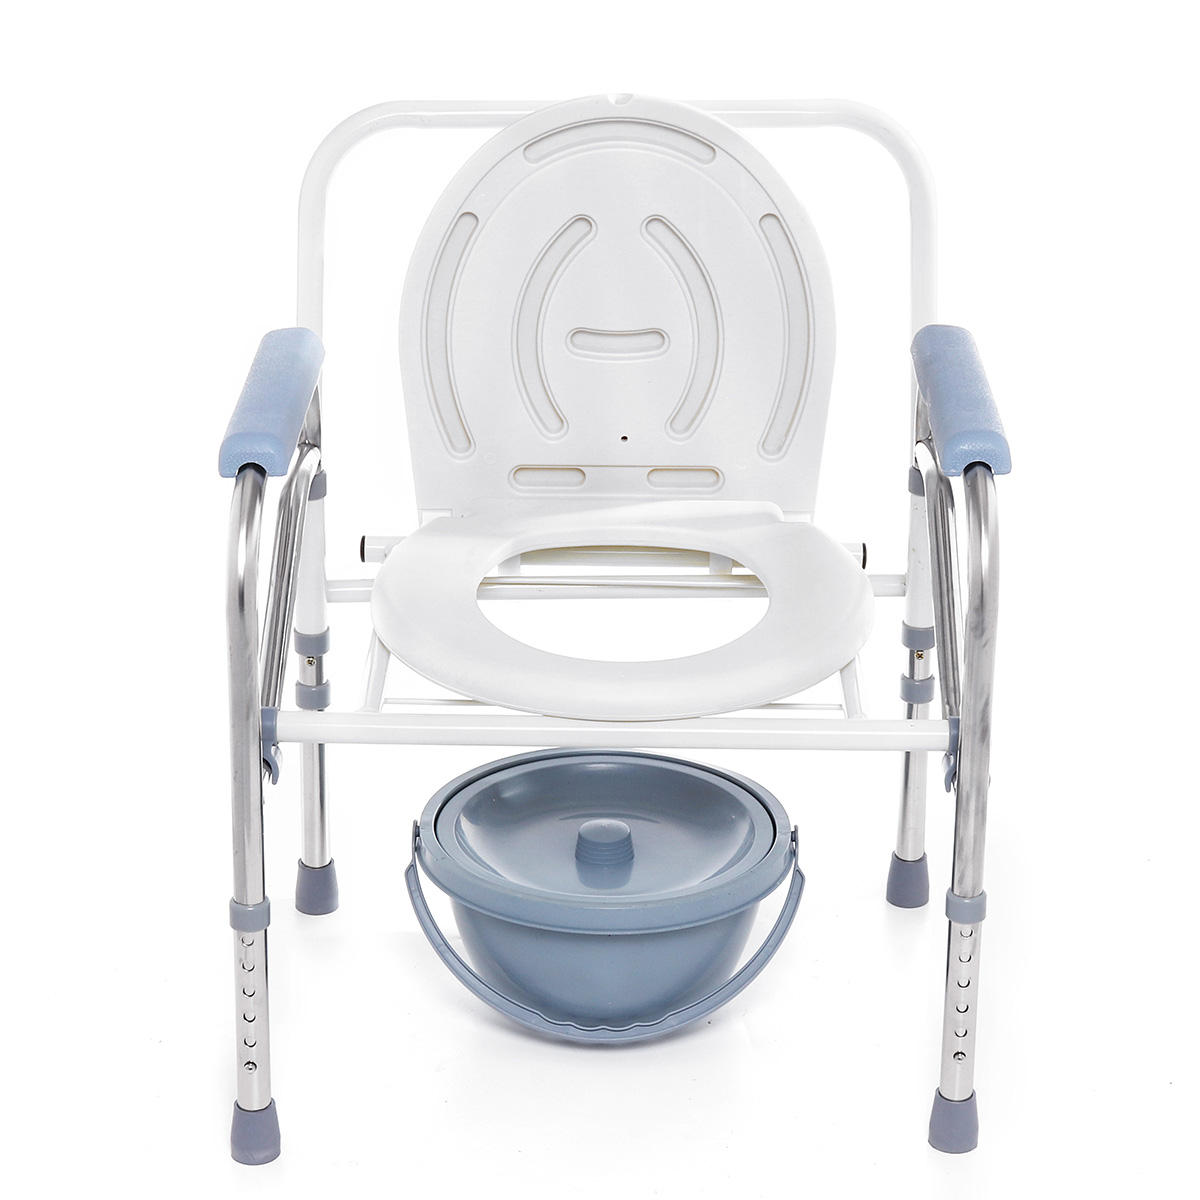 Portable Foldable Potty Chair Toilet Adjustable Commode Chair